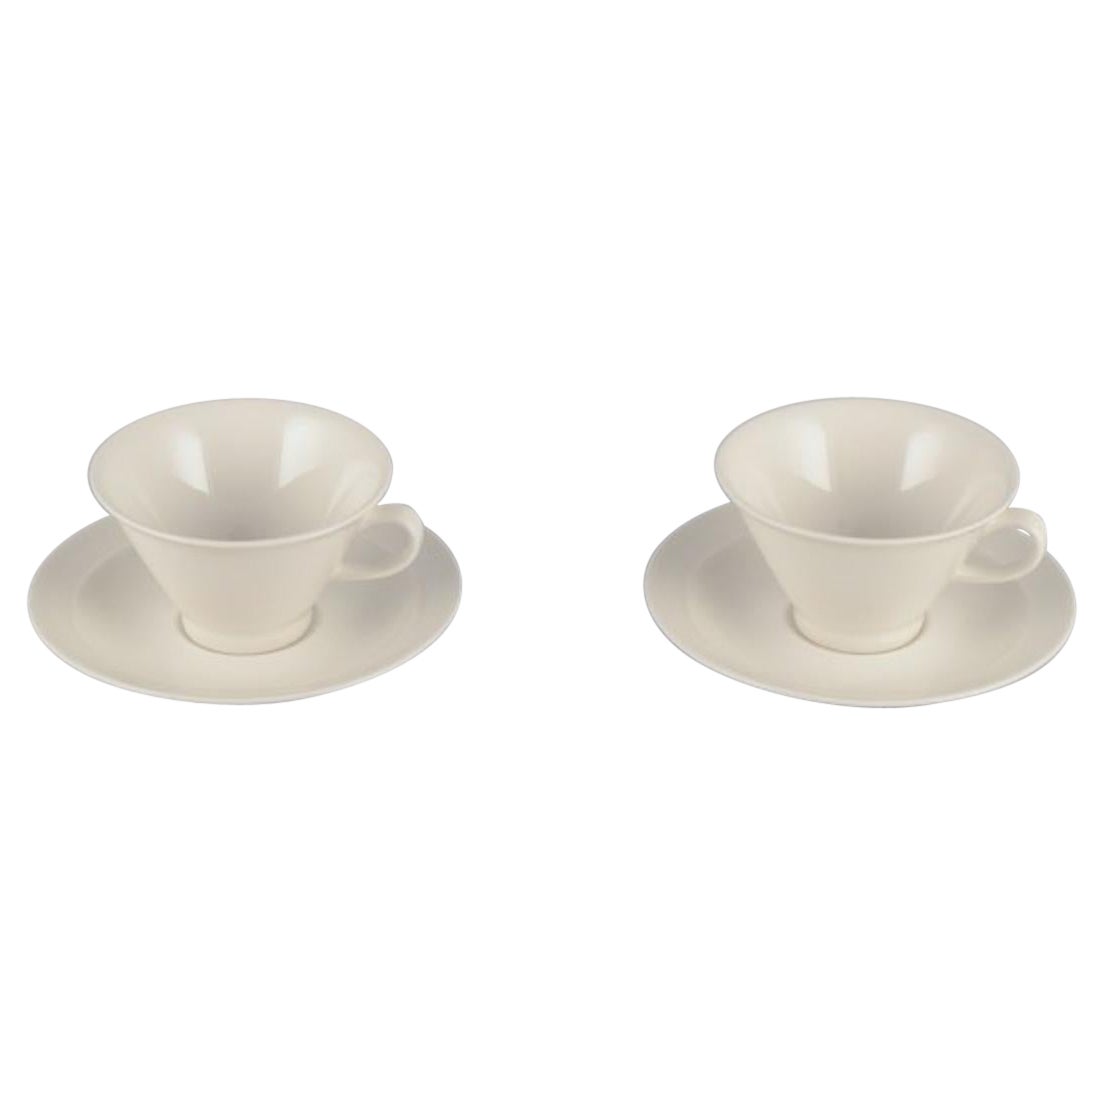 Arabia, Finland, Two sets of "Harlekin" tea cups and saucers in white porcelain.